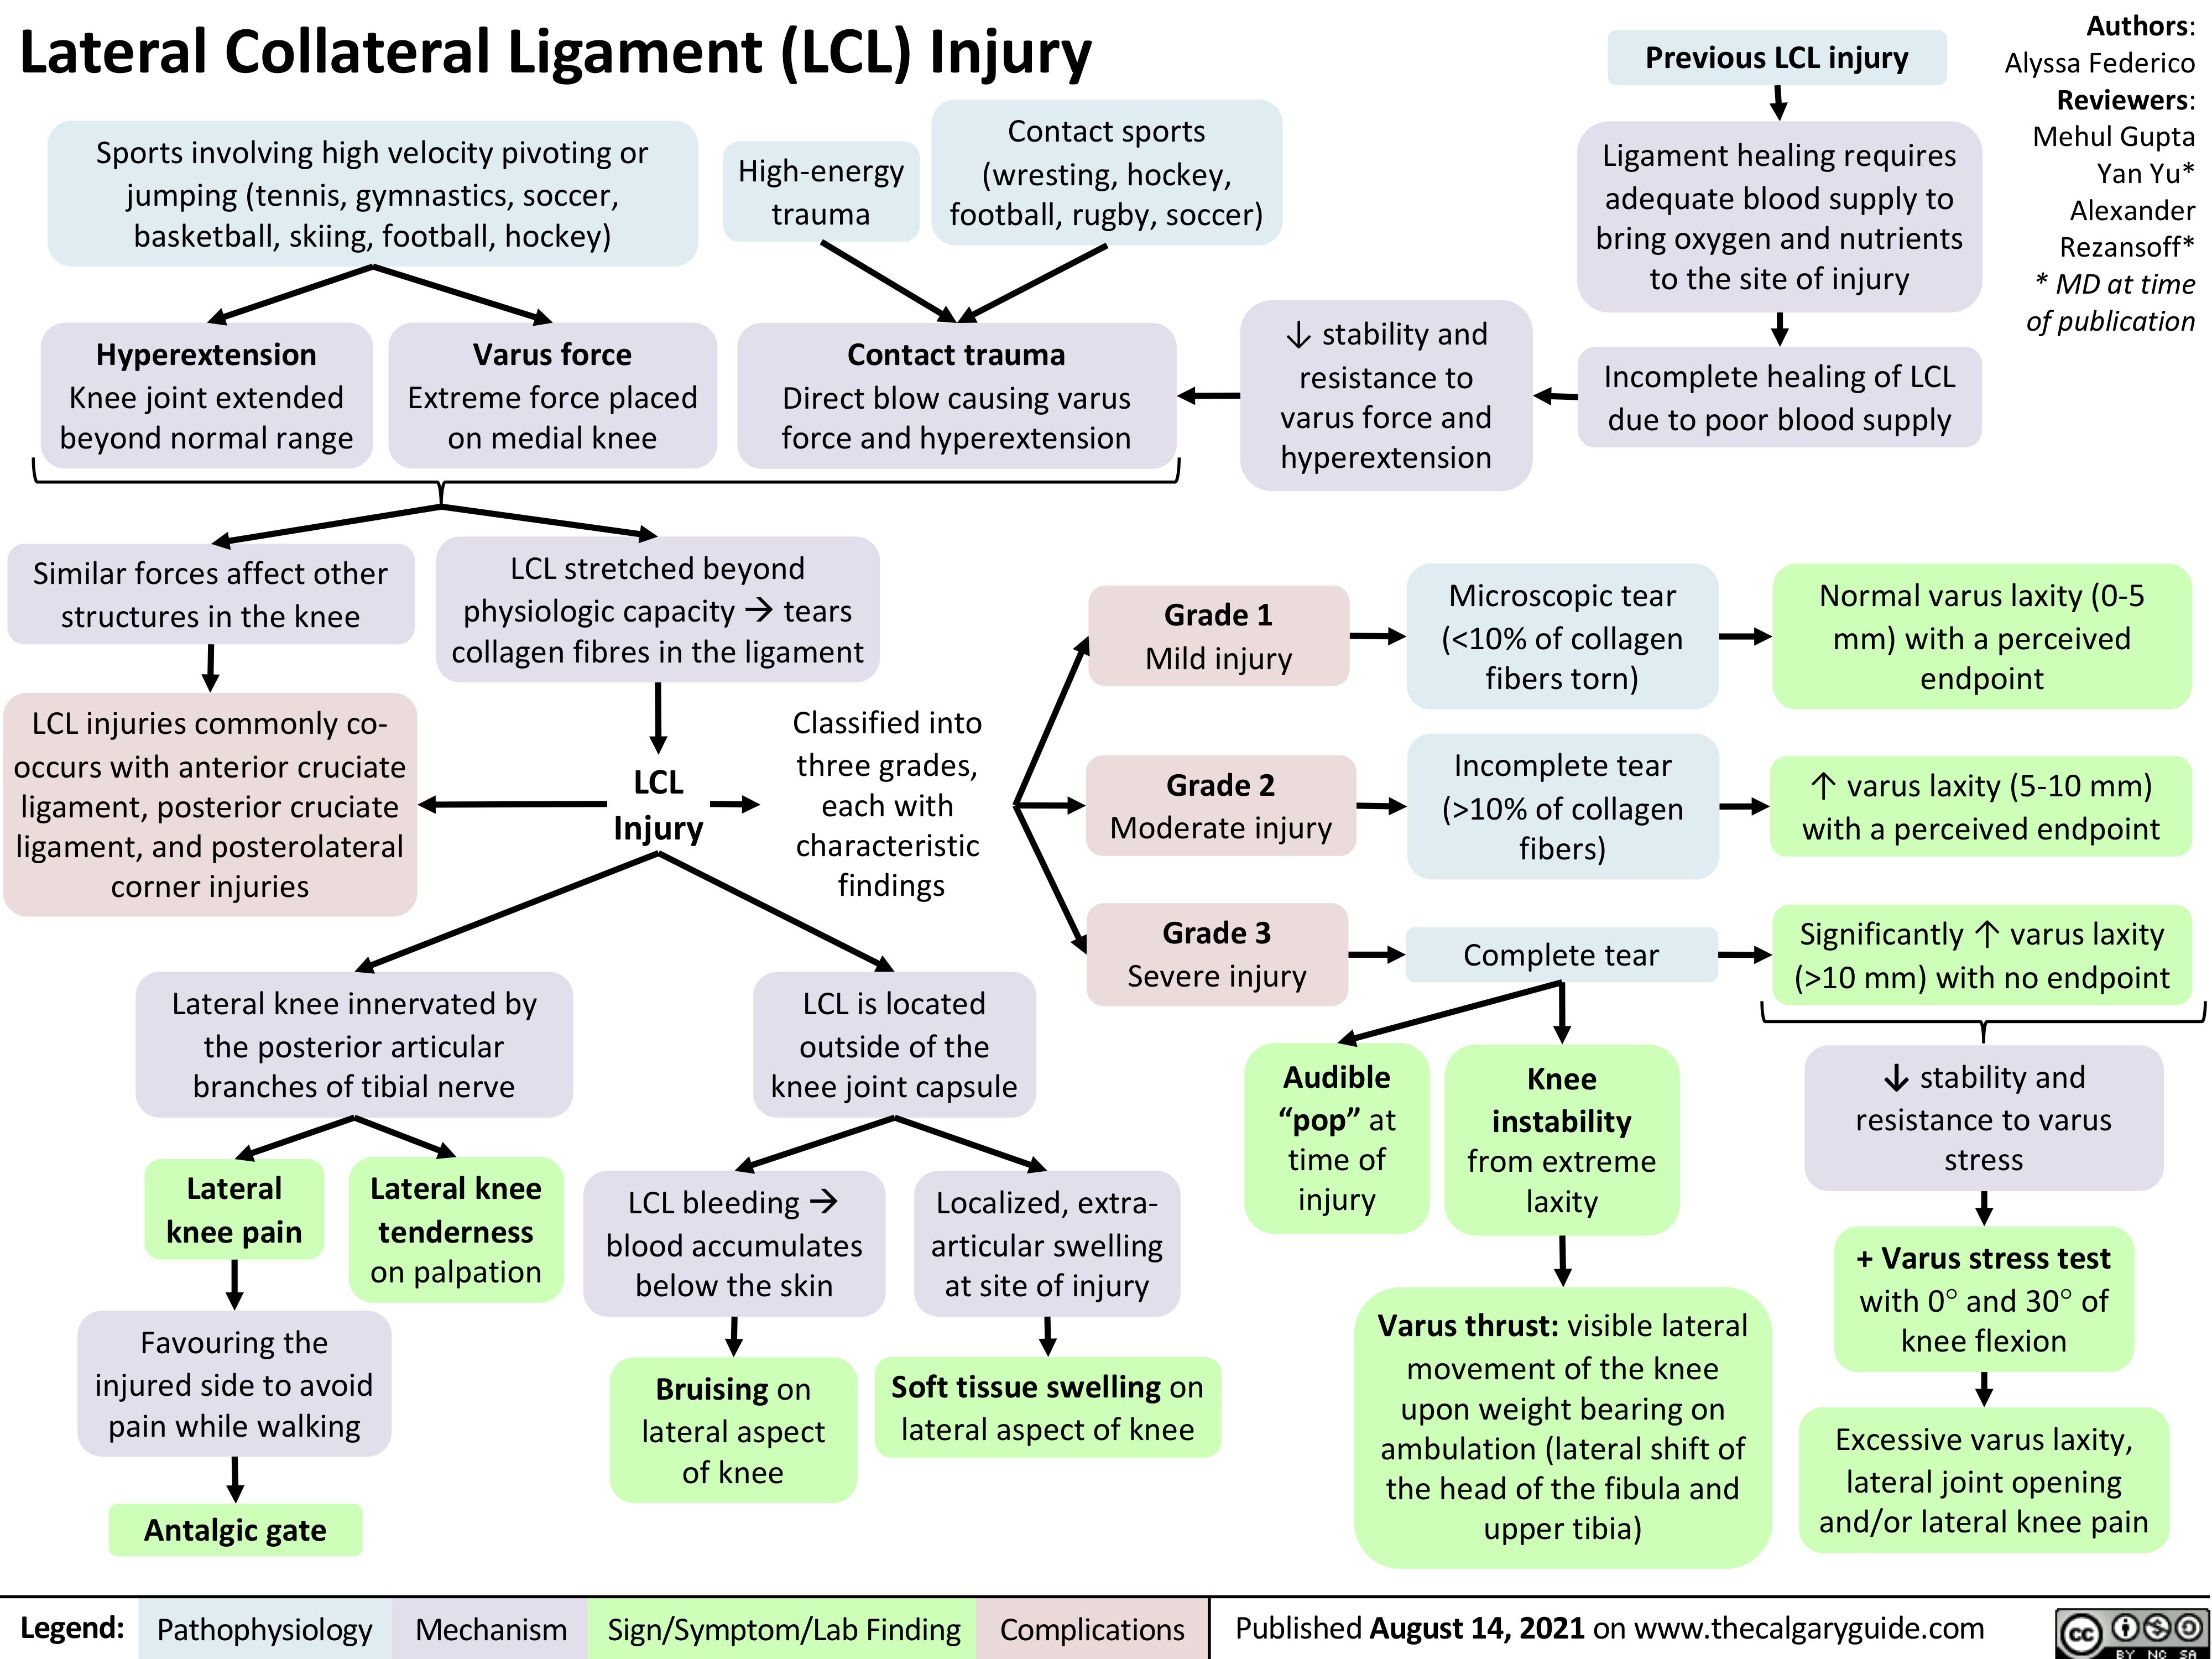 Lateral Collateral Ligament (LCL) Injury
Previous LCL injury
Ligament healing requires
adequate blood supply to bring oxygen and nutrients to the site of injury
Incomplete healing of LCL due to poor blood supply
Authors: Alyssa Federico Reviewers: Mehul Gupta Yan Yu* Alexander Rezansoff* * MD at time of publication
     Sports involving high velocity pivoting or jumping (tennis, gymnastics, soccer, basketball, skiing, football, hockey)
High-energy trauma
Contact sports (wresting, hockey, football, rugby, soccer)
         Hyperextension
Knee joint extended beyond normal range
Similar forces affect other structures in the knee
LCL injuries commonly co- occurs with anterior cruciate ligament, posterior cruciate ligament, and posterolateral corner injuries
Lateral knee innervated by the posterior articular branches of tibial nerve
↓ stability and resistance to varus force and hyperextension
Varus force
Extreme force placed on medial knee
Contact trauma
Direct blow causing varus force and hyperextension
        LCL stretched beyond physiologic capacityàtears collagen fibres in the ligament
Grade 1
Mild injury
Grade 2
Moderate injury
Grade 3
Severe injury
Microscopic tear (<10% of collagen fibers torn)
Incomplete tear (>10% of collagen fibers)
Complete tear
Knee instability from extreme laxity
Normal varus laxity (0-5 mm) with a perceived endpoint
↑ varus laxity (5-10 mm) with a perceived endpoint
Significantly ↑ varus laxity (>10 mm) with no endpoint
↓ stability and resistance to varus stress
+ Varus stress test
with 0° and 30° of knee flexion
Excessive varus laxity, lateral joint opening and/or lateral knee pain
            LCL Injury
Classified into three grades, each with characteristic
findings
LCL is located outside of the knee joint capsule
                      Lateral knee pain
Lateral knee tenderness on palpation
LCL bleedingà blood accumulates below the skin
Bruising on lateral aspect of knee
Localized, extra- articular swelling at site of injury
Soft tissue swelling on lateral aspect of knee
Audible “pop” at time of injury
          Favouring the injured side to avoid pain while walking
Antalgic gate
Varus thrust: visible lateral movement of the knee upon weight bearing on ambulation (lateral shift of the head of the fibula and upper tibia)
       Legend:
 Pathophysiology
Mechanism
Sign/Symptom/Lab Finding
  Complications
Published August 14, 2021 on www.thecalgaryguide.com
    